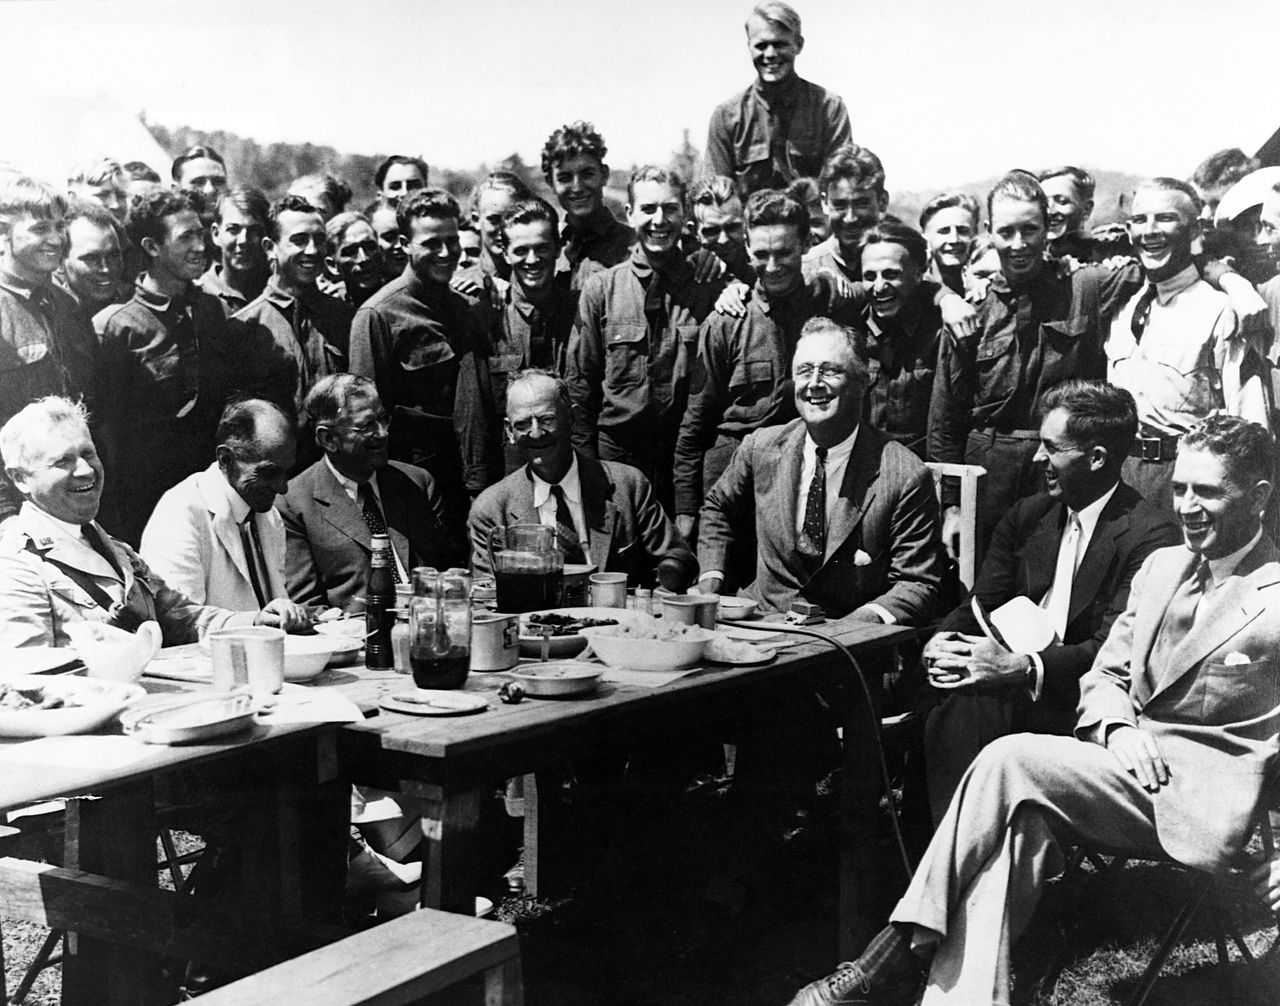 President Franklin Roosevelt visits Civilian Conservation Corps Camp #350 in Virginia's Shenandoah Valley with his aide Rexford Tugwell (far right). The CCC was an example of what the war metaphor's peacetime mobilization looked like in action.